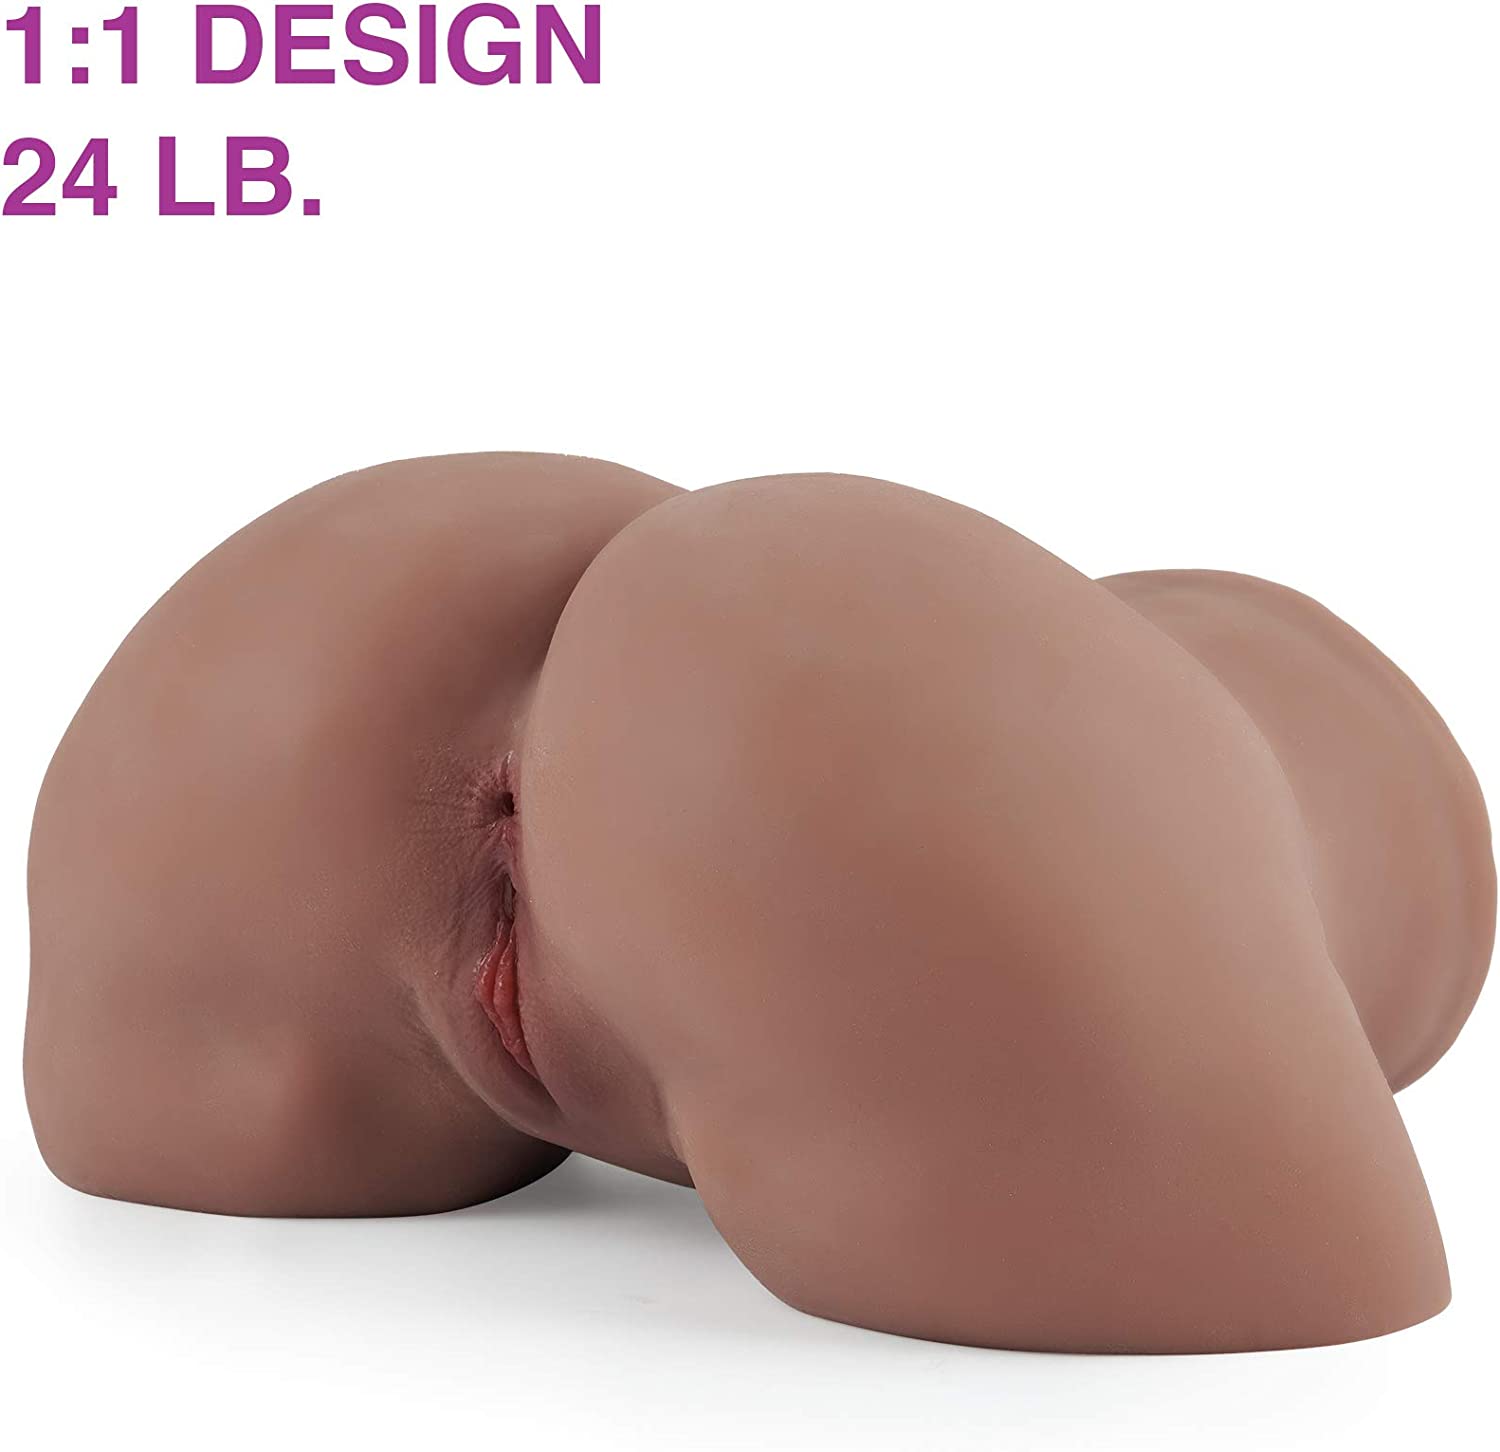 Doggystyle Ass Doll - Anxiety Toys For Men Anxiety Toys For Men Anxiety Toys For Men